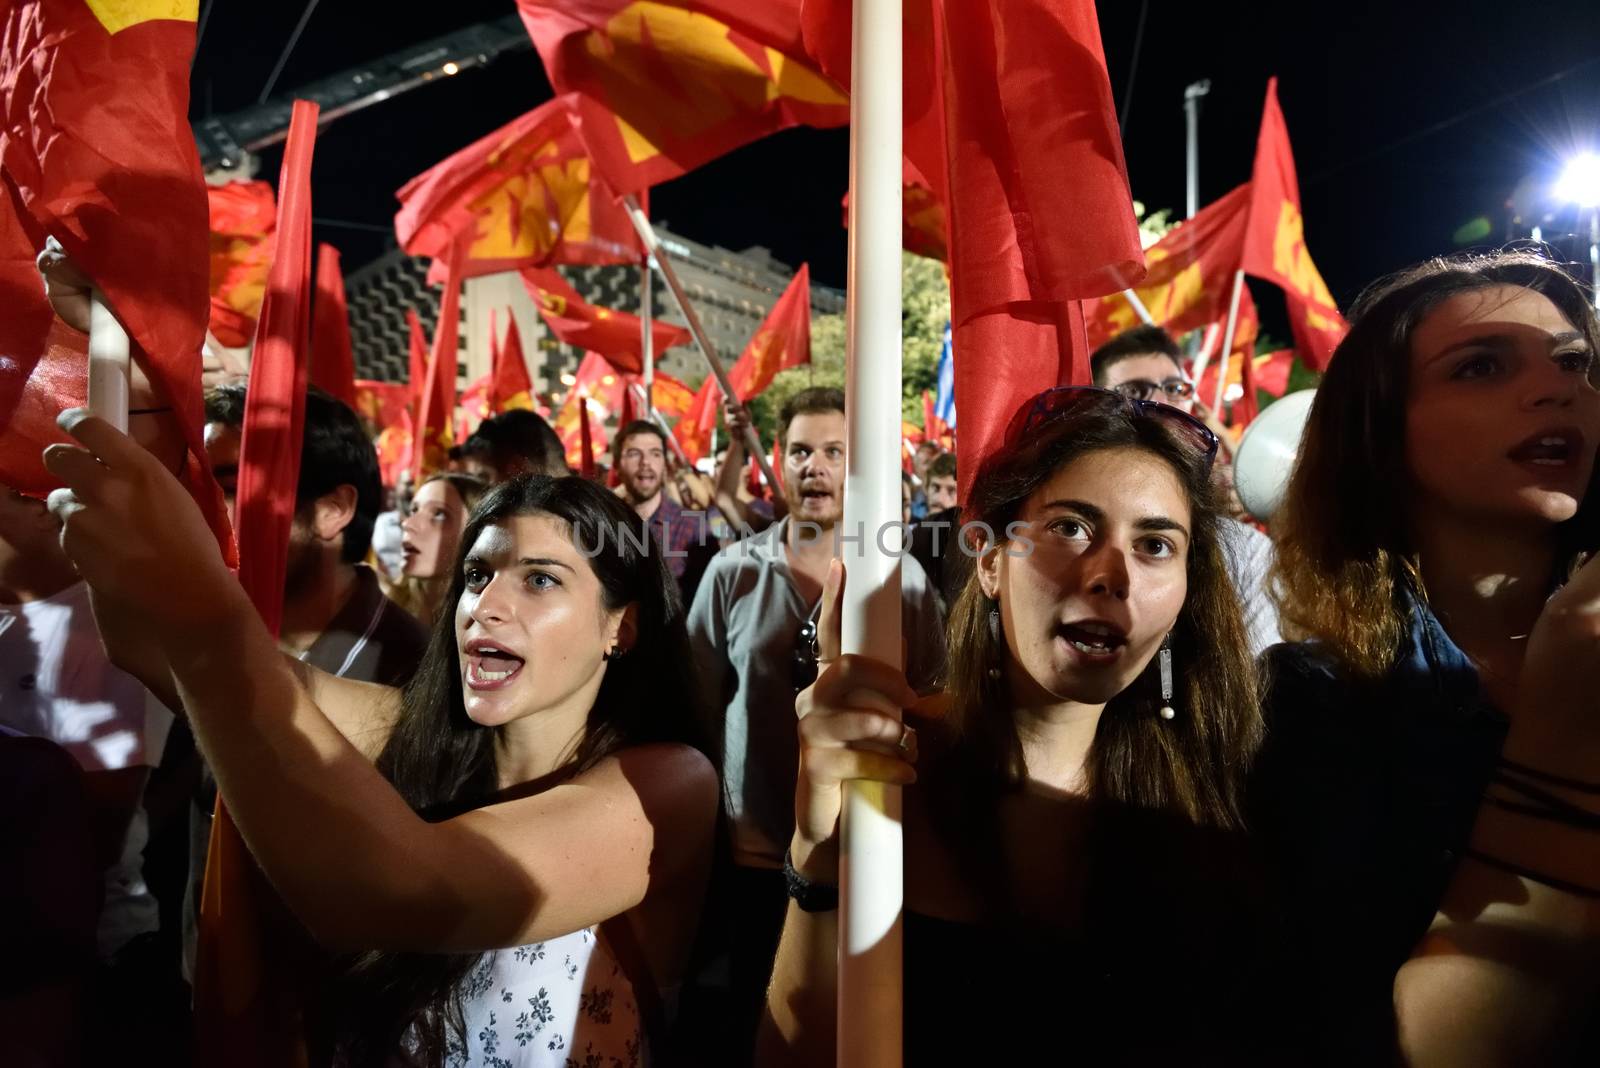 GREECE, Athens: Supporters of the Communist Party of Greece (KKE) cheer during the party's campaign rally in Athens on September 16, 2015, ahead of the forthcoming snap elections on September 20. At the rally, KKE General Secretary Dimitris Koutsoumpas addressed supporters.